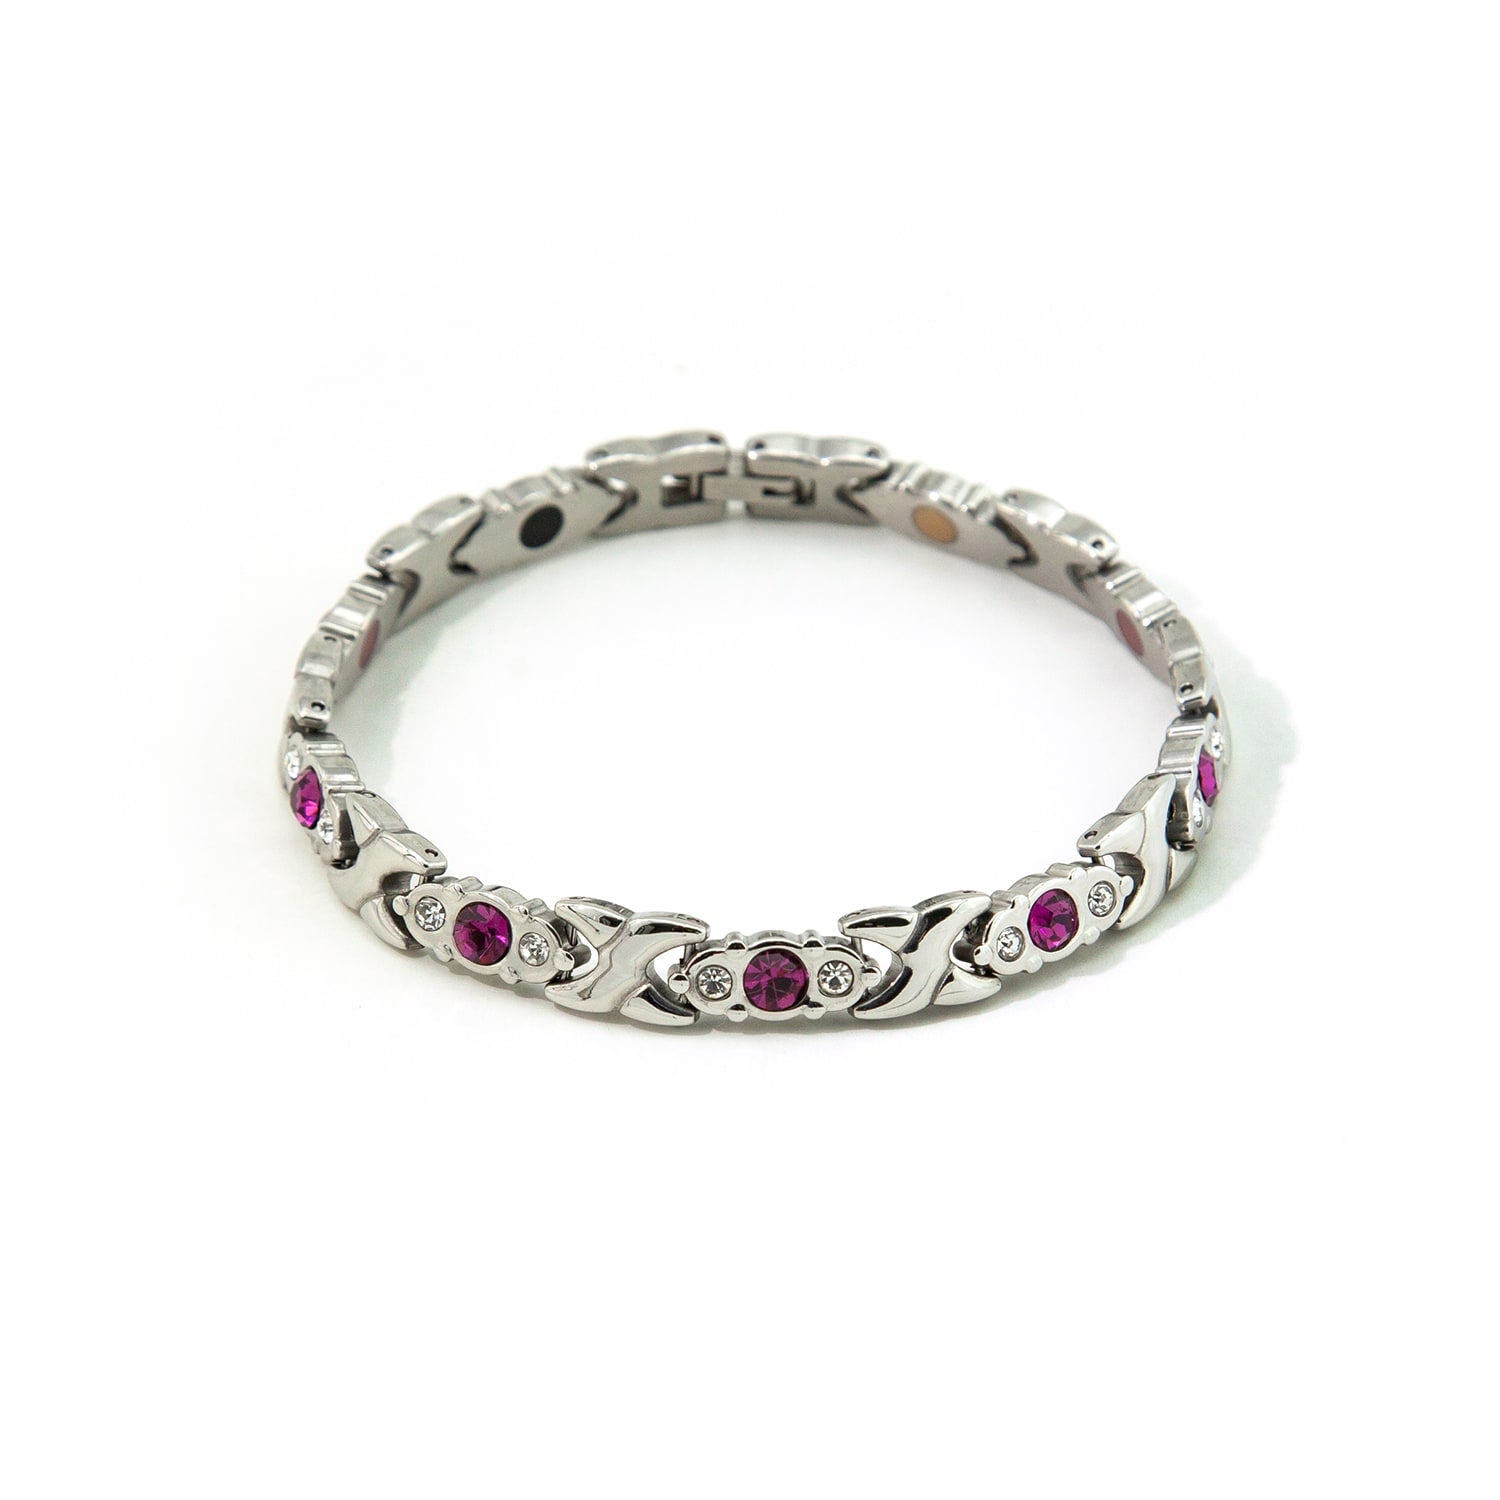 Princess Bride - Negative Ion Bracelet, Stainless Steel with Pink Crystals